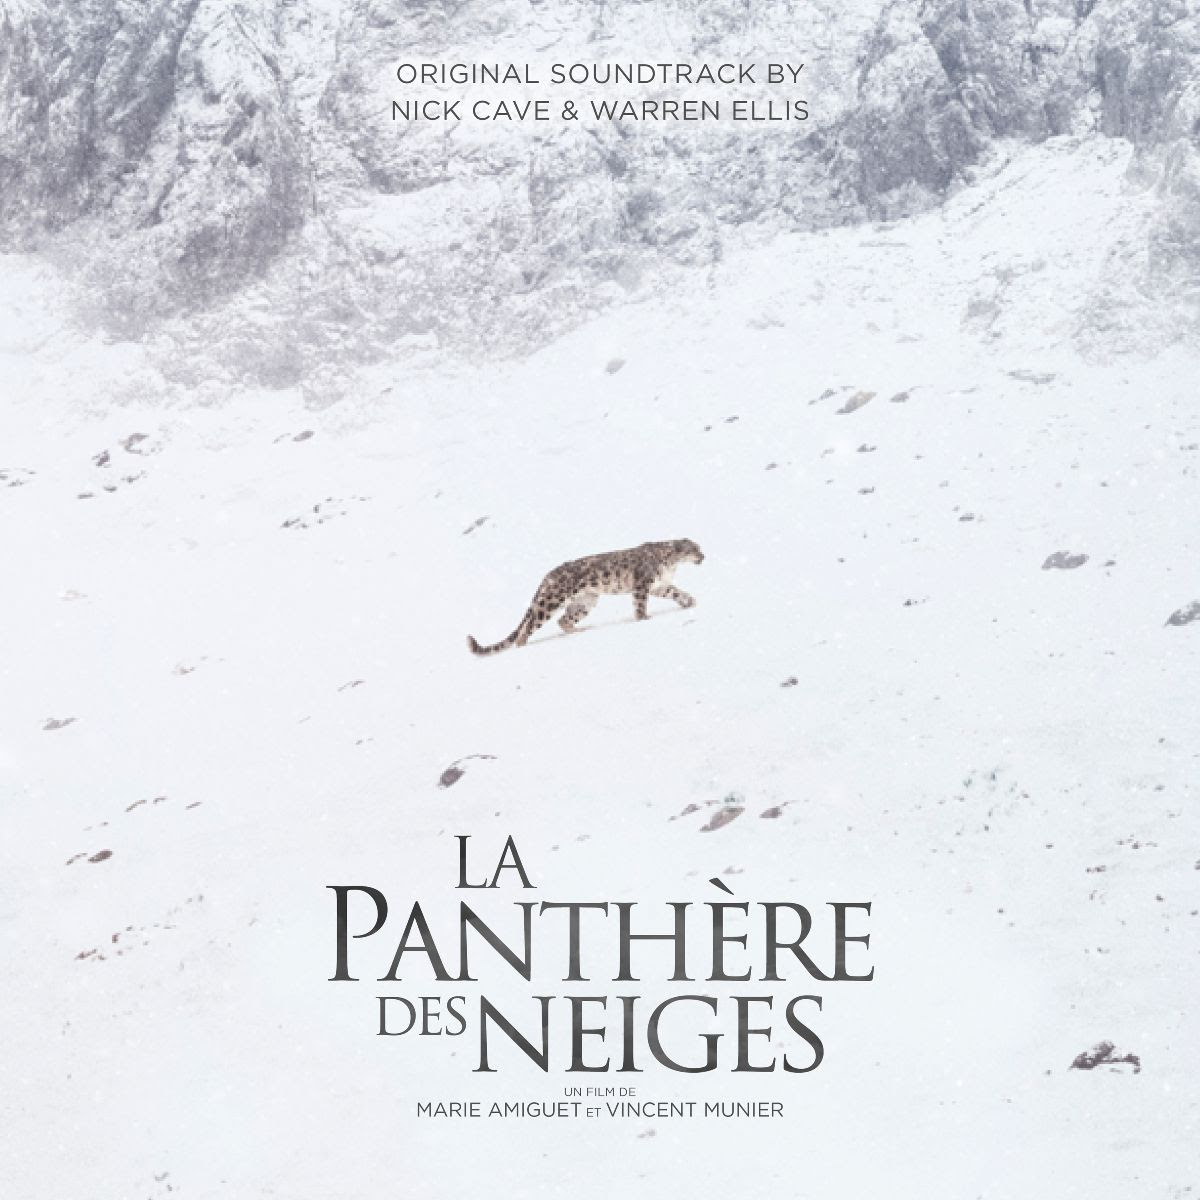 NEWS: Nick Cave and Warren Ellis share glacial track ‘Les Cerfs’ from forthcoming soundtrack La Panthère Des Neiges (AKA The Velvet Queen)